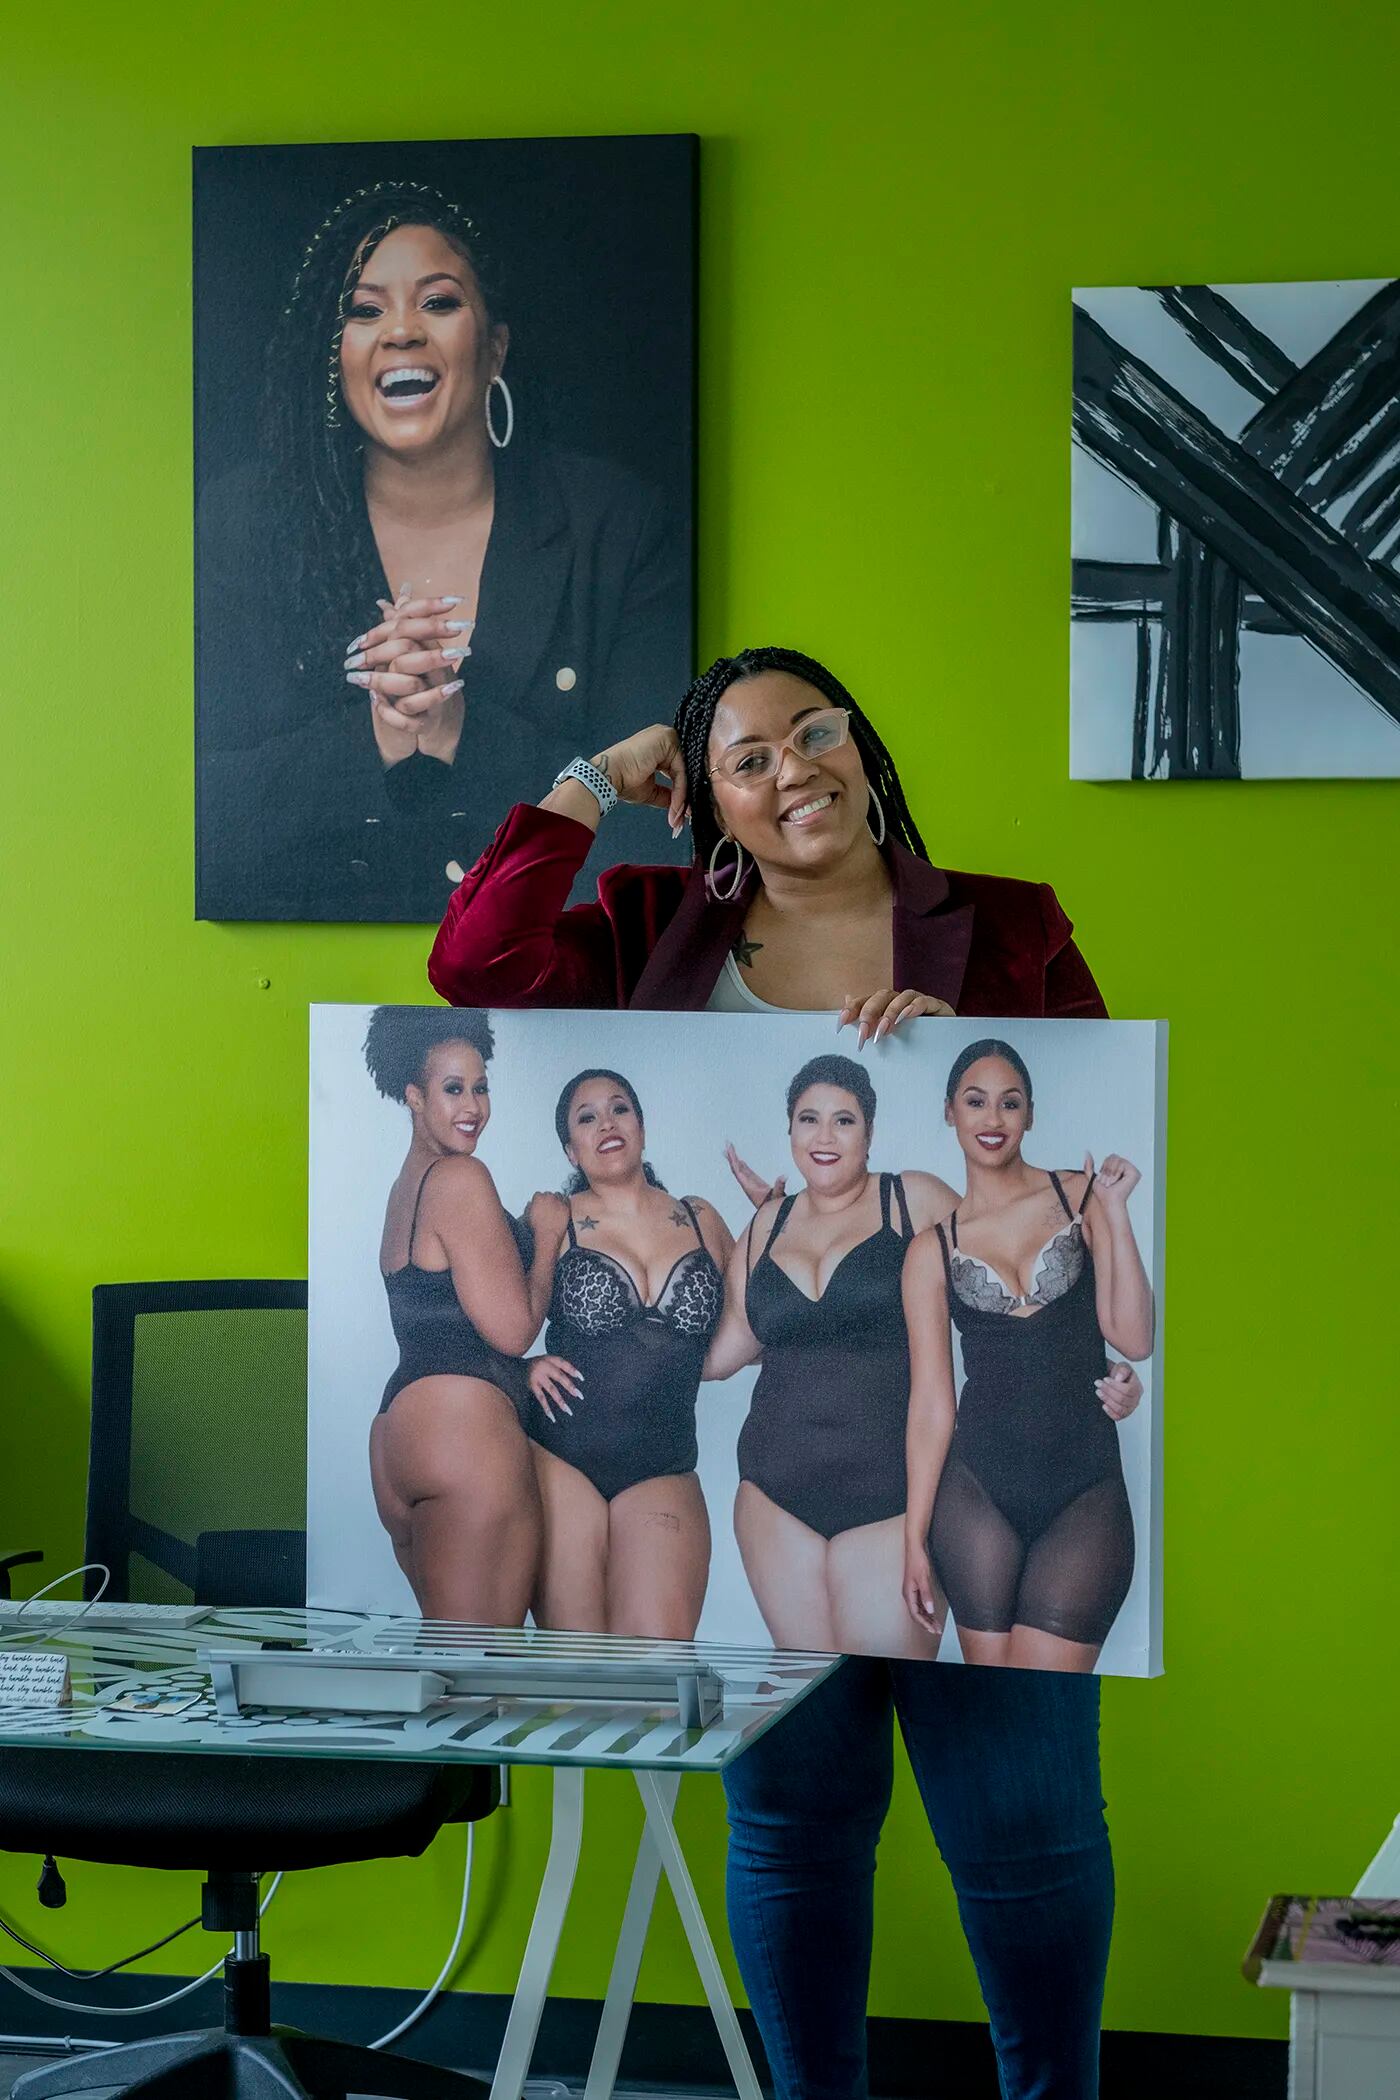 This Philly-famous woman helps curvy ladies show off their waistlines, too